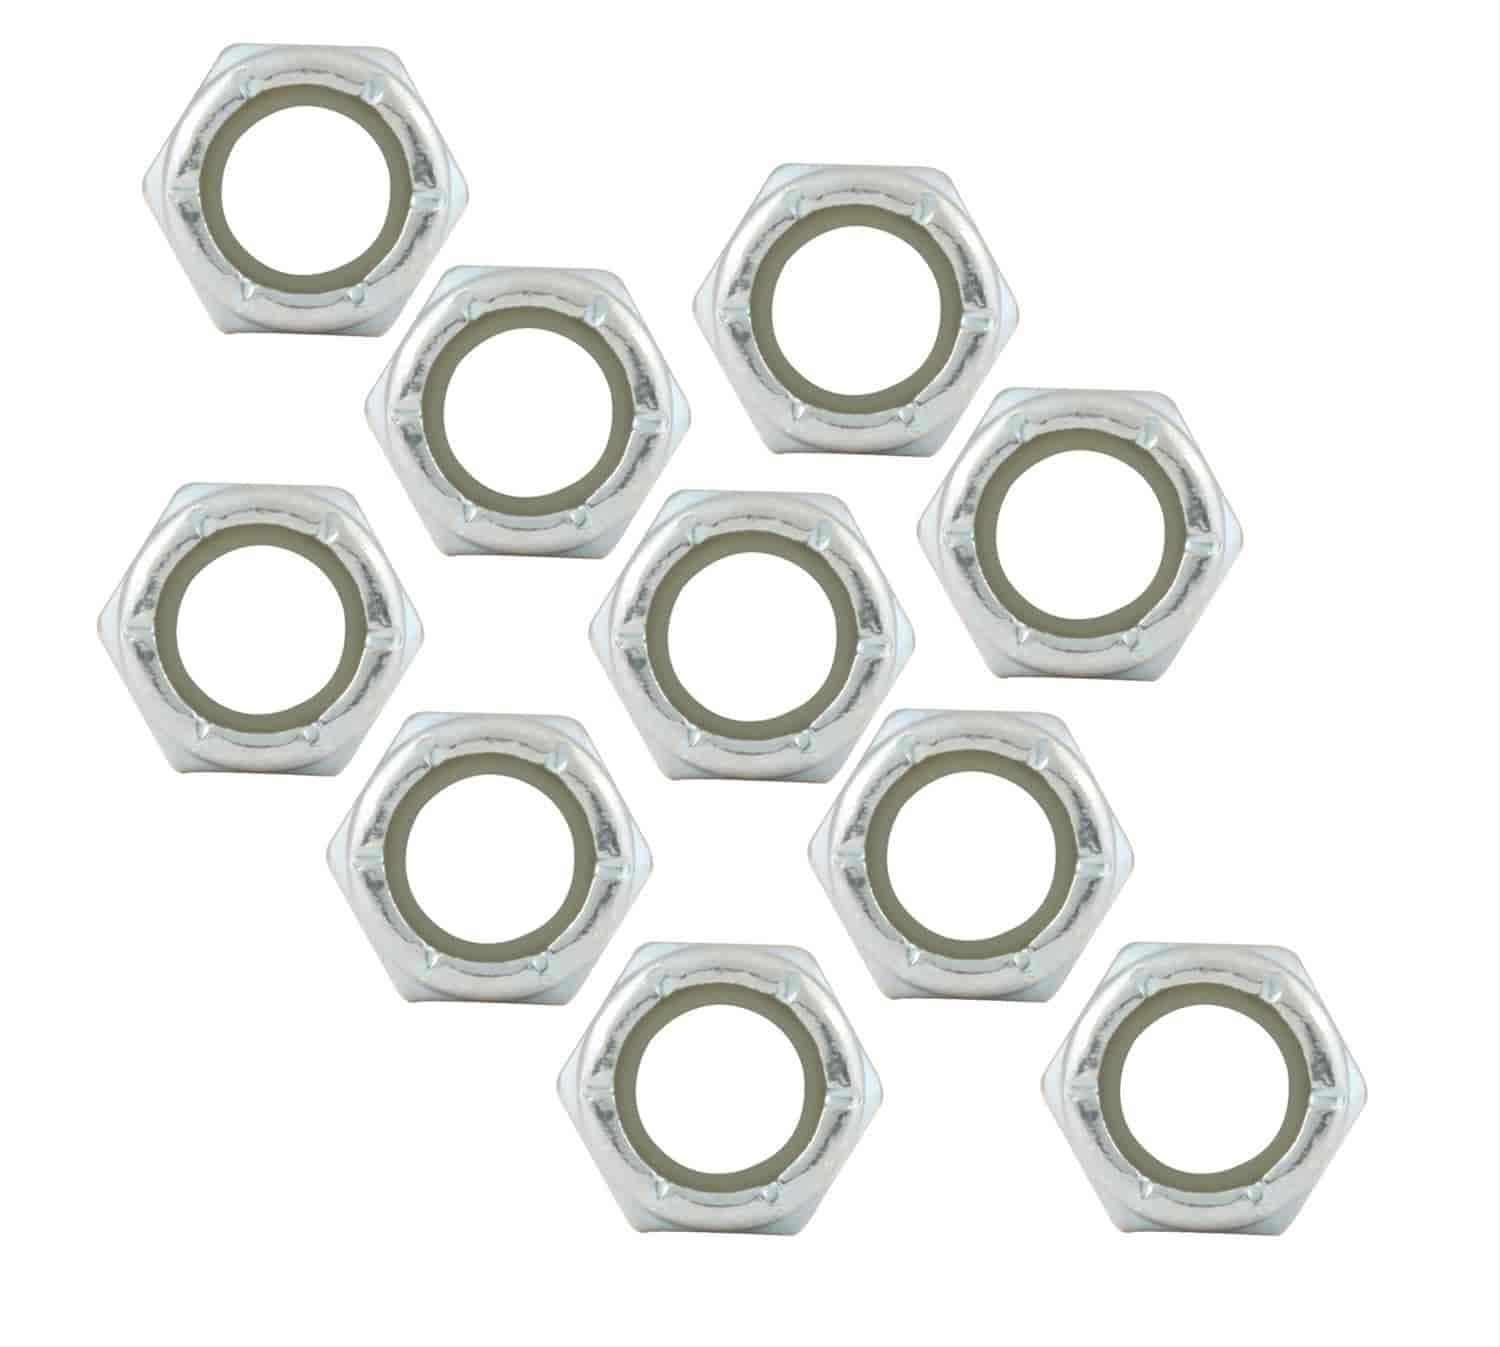 Fine Thread Hex Nuts Thin With Nylon Inserts 3/8"-24